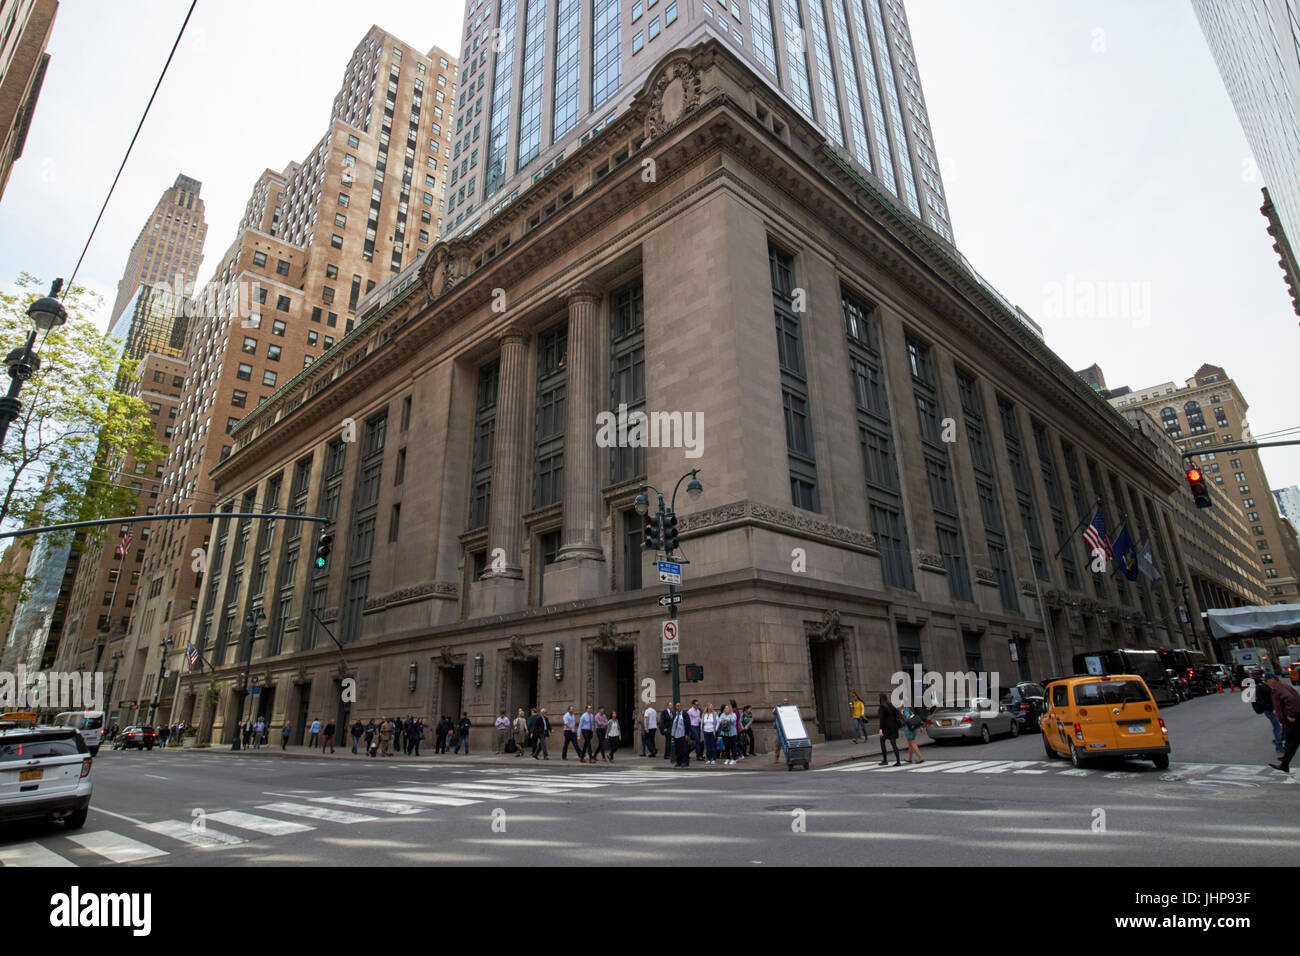 450 lexingon avenue on top of the old grand central post office New York City USA Stock Photo